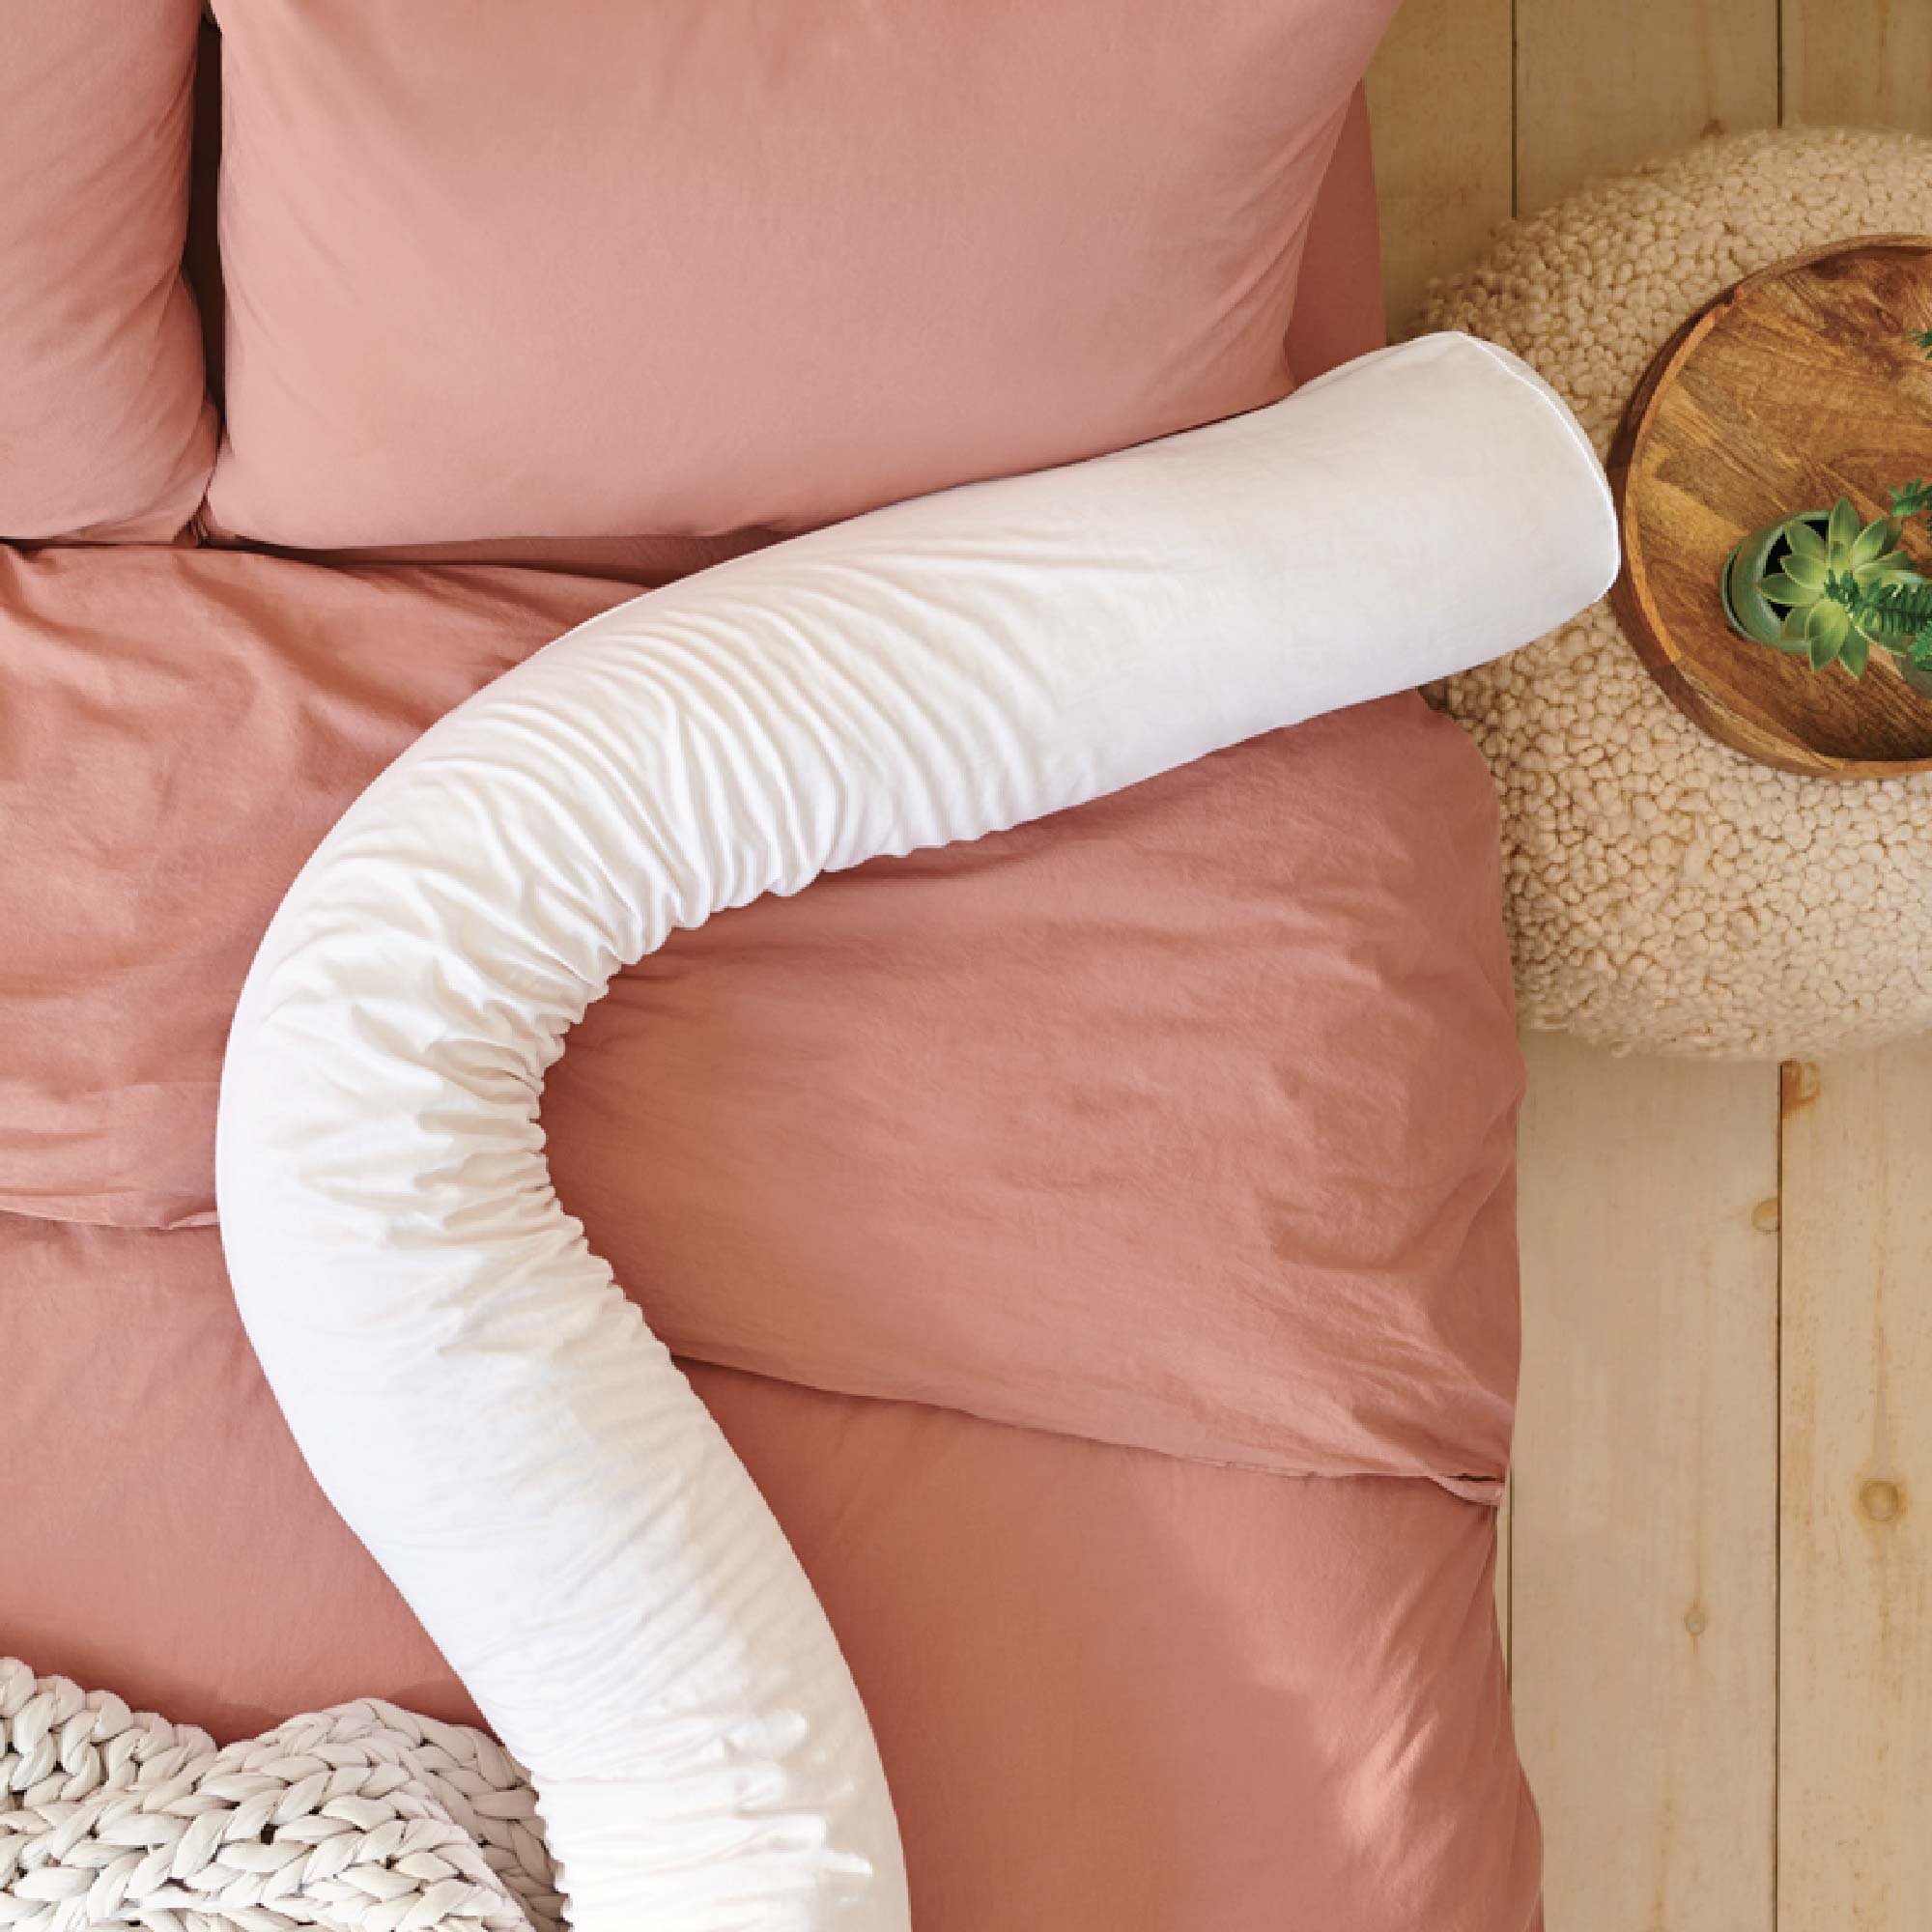 How to Wash a Body Pillow: 3 Steps to Cozy Clean